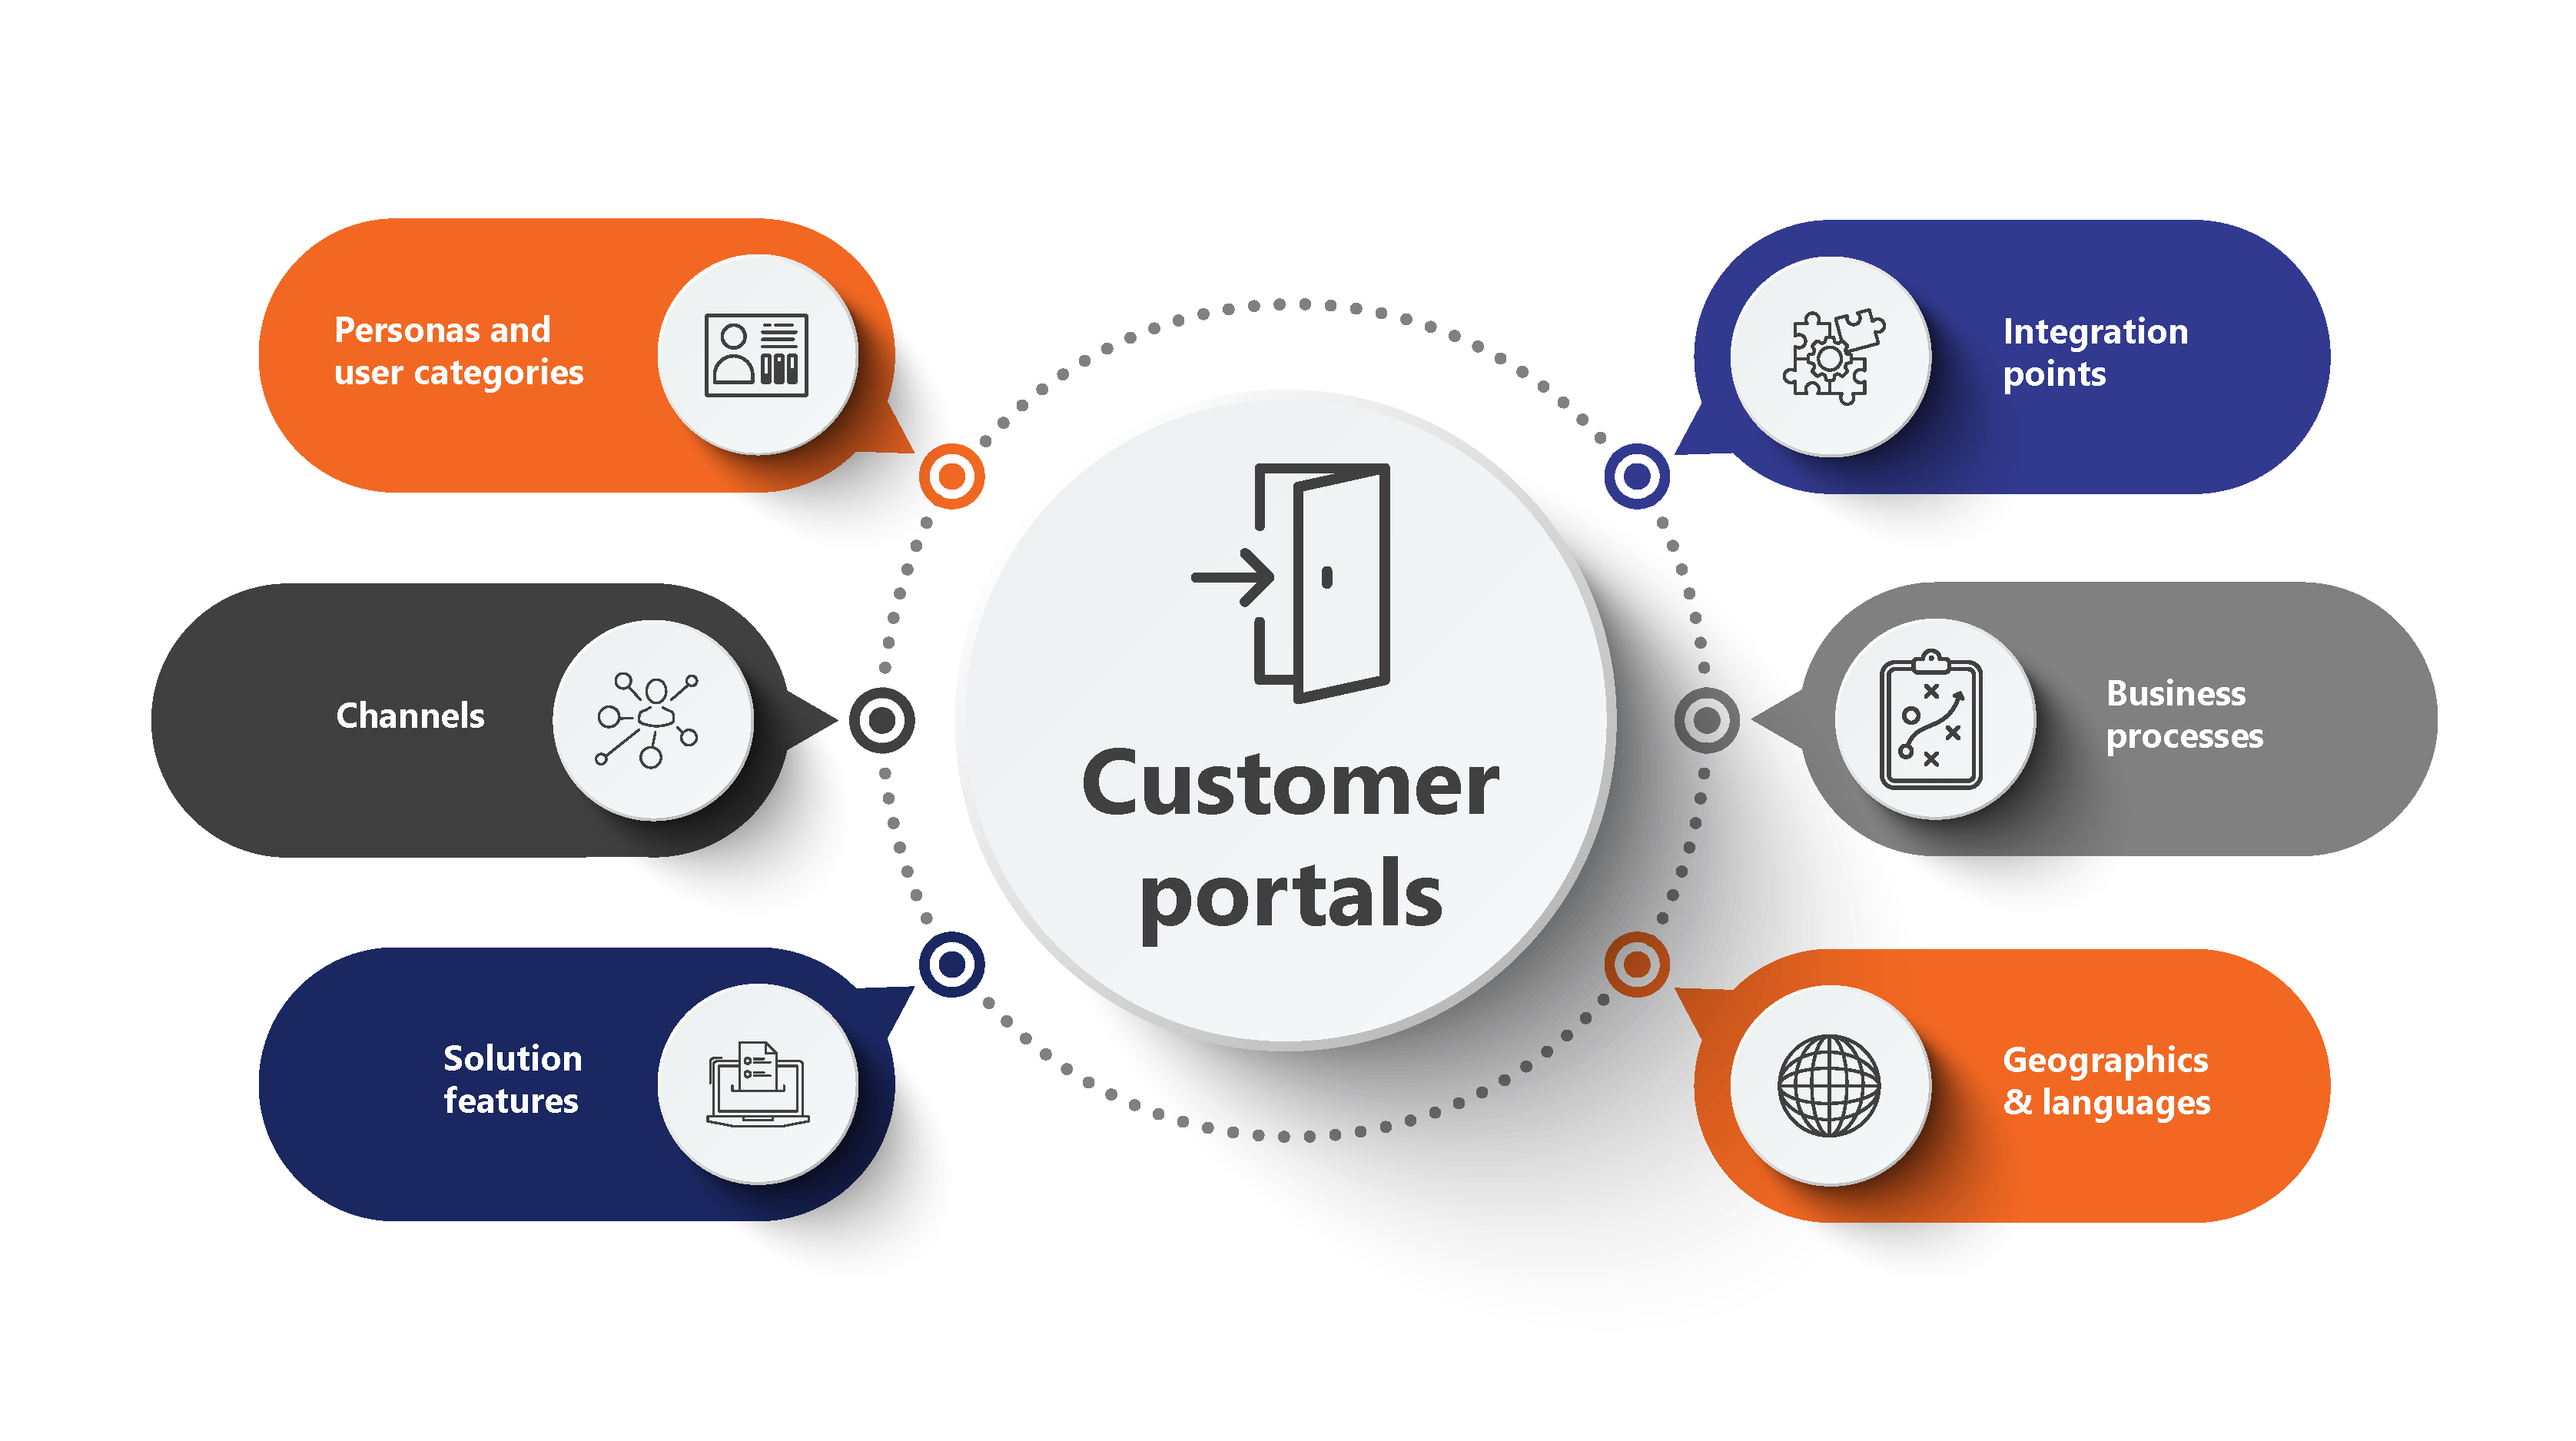 6 dimensions of customer portal implementation: •	Personas and user categories<br />
•	Channels<br />
•	Solution features<br />
•	Integration points<br />
•	Business processes<br />
•	Geographies and languages